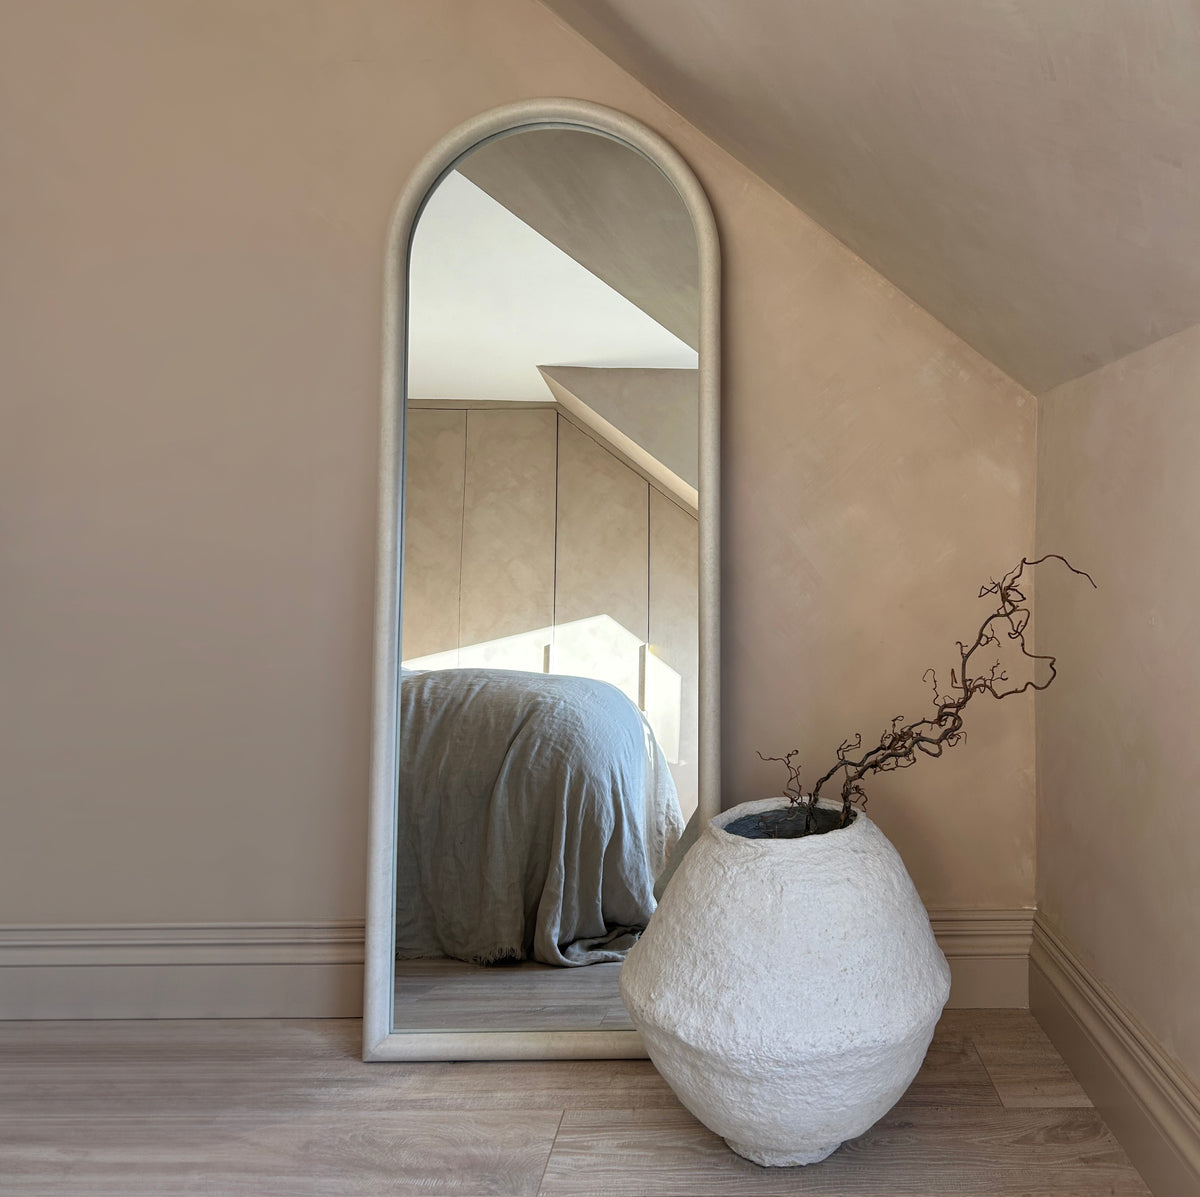 Large arched concrete mirror leaning against wall